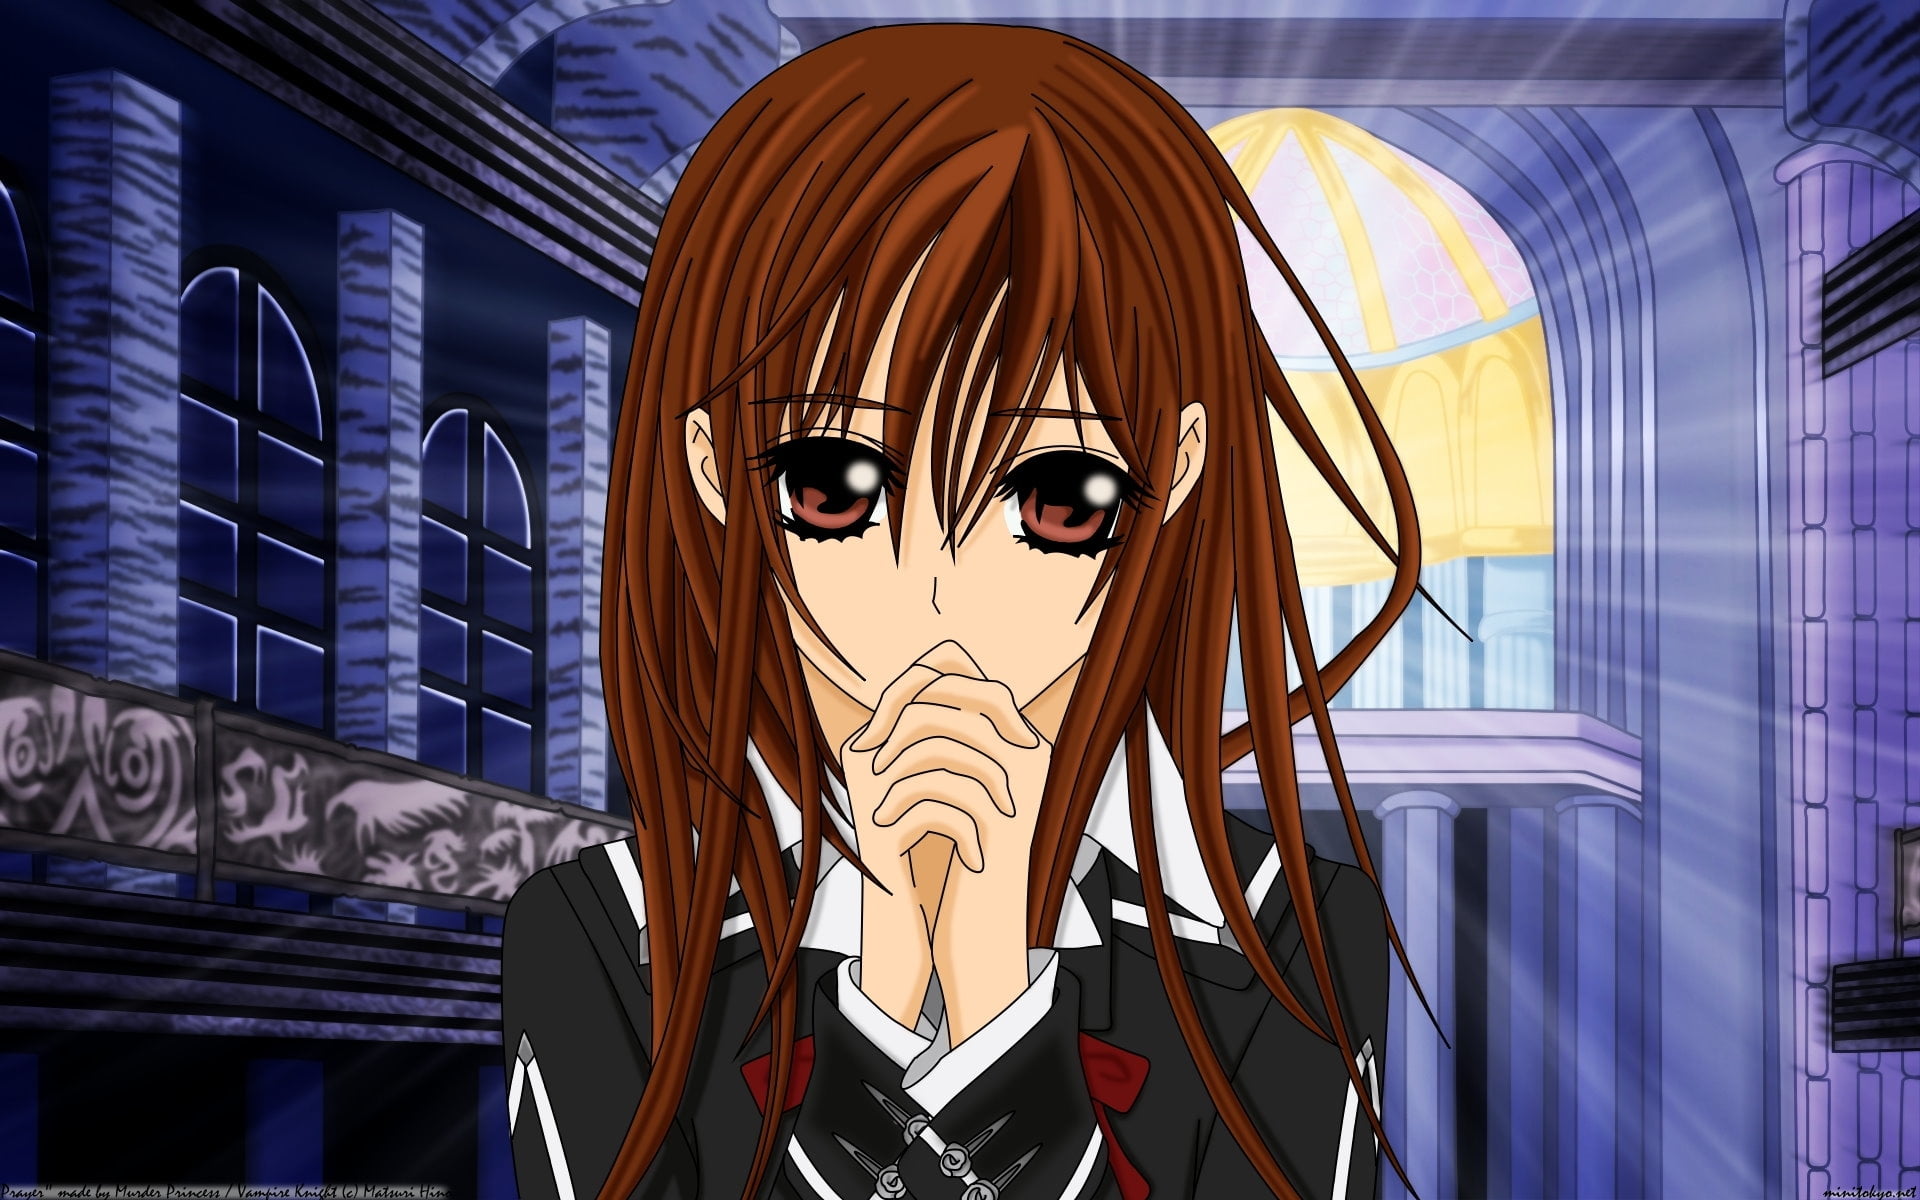 Female anime  character wearing black top while in praying 